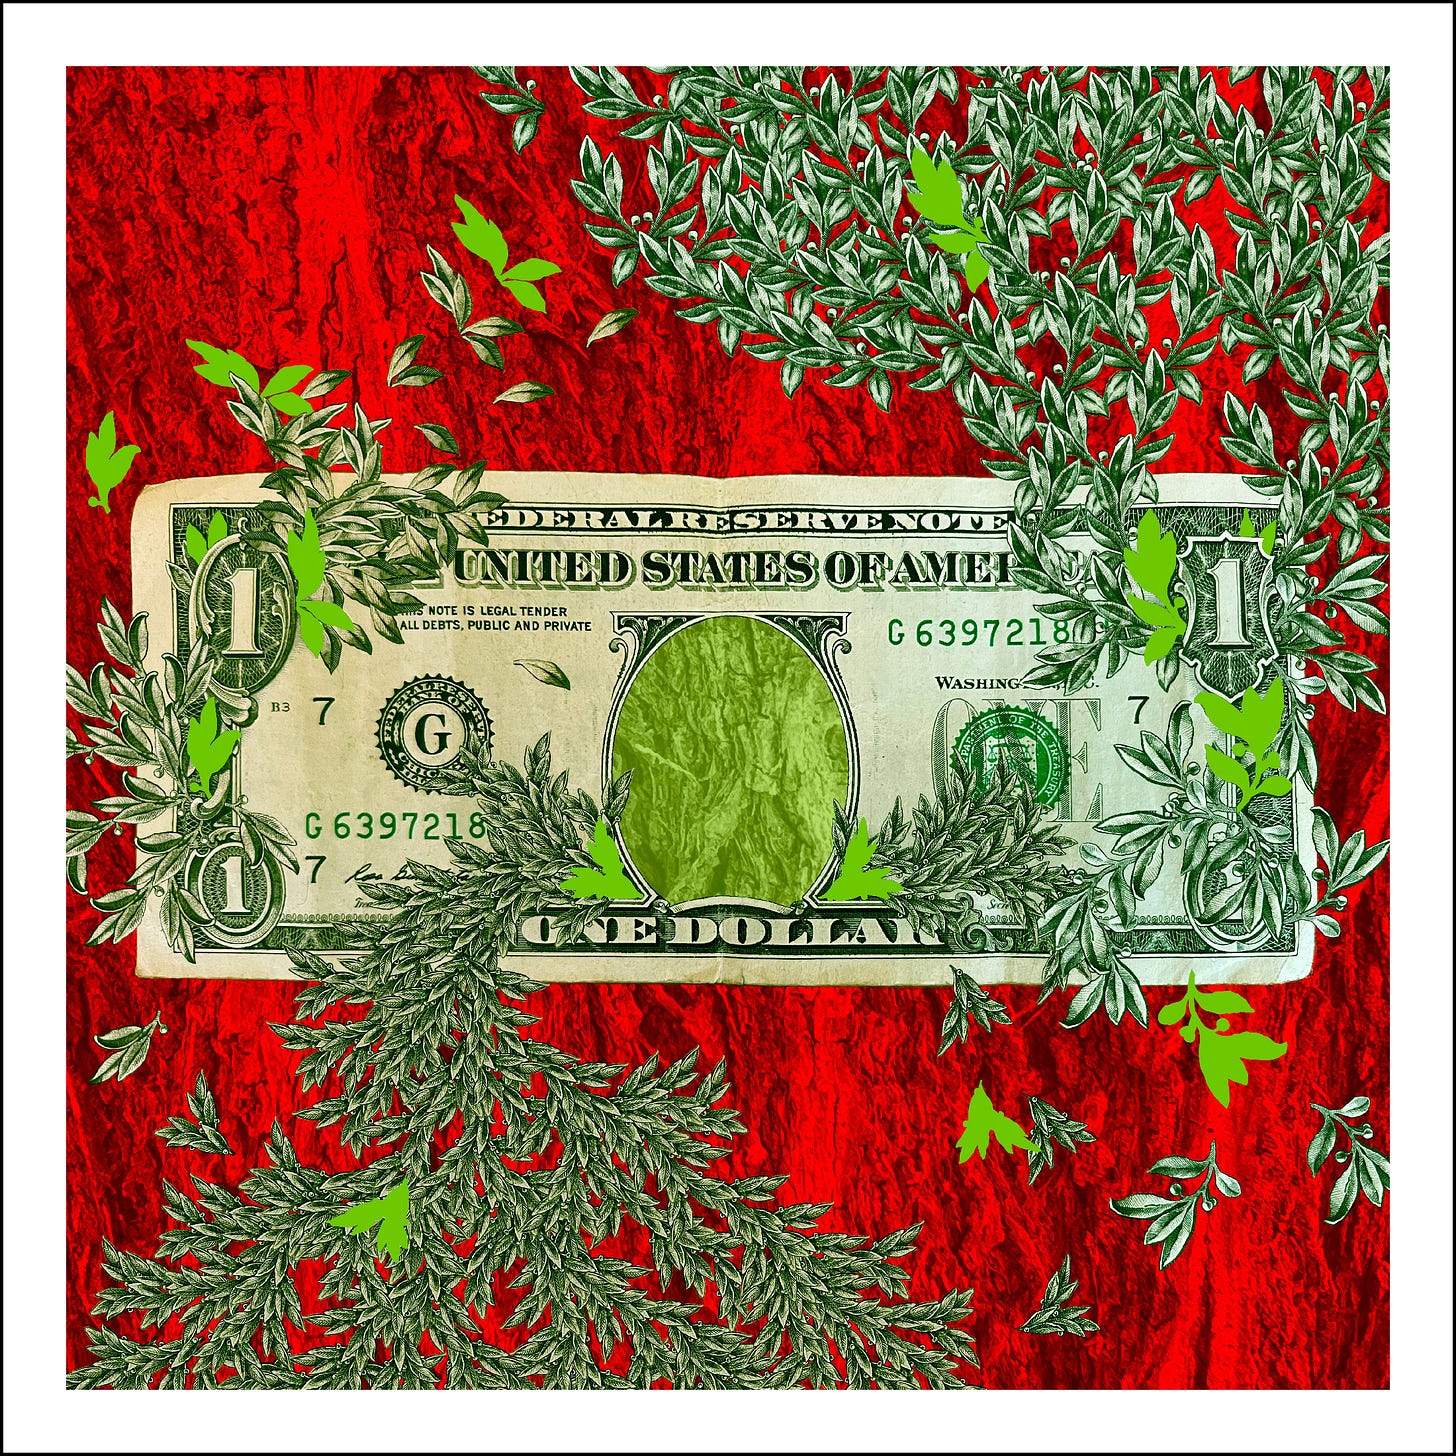 Rainbow Squared Year Seven, 04. Red Green. A green United States one dollar bill has its leaves repeating and growing out from it, all around the frame. The portrait in the center is cut out to reveal bark from an elder tree underneath, which also fills the background.